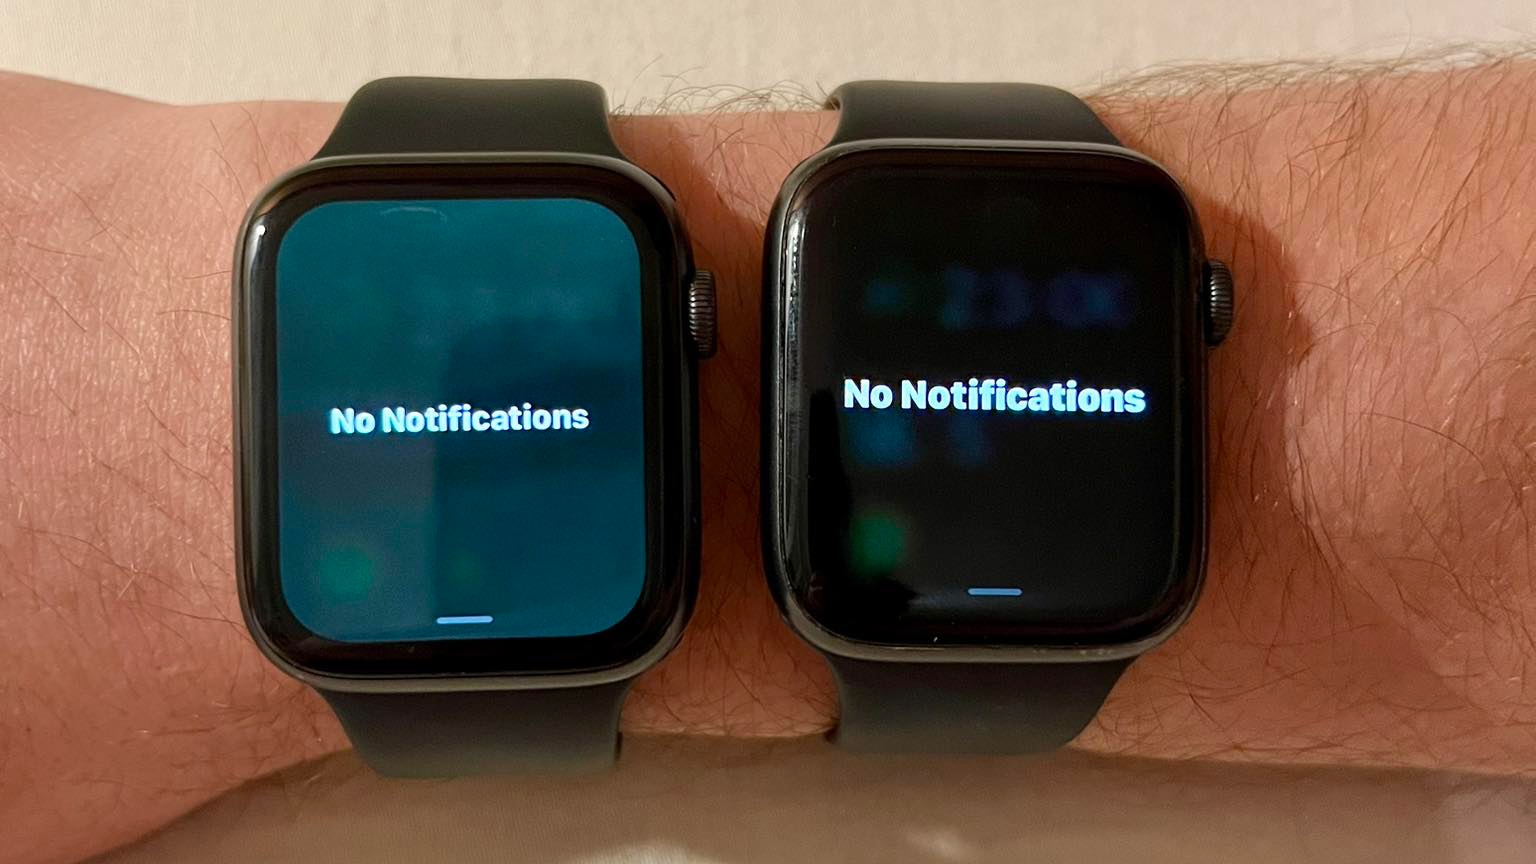 Strange Apple Watch display tint after installing watchOS 9.5? You’re not alone